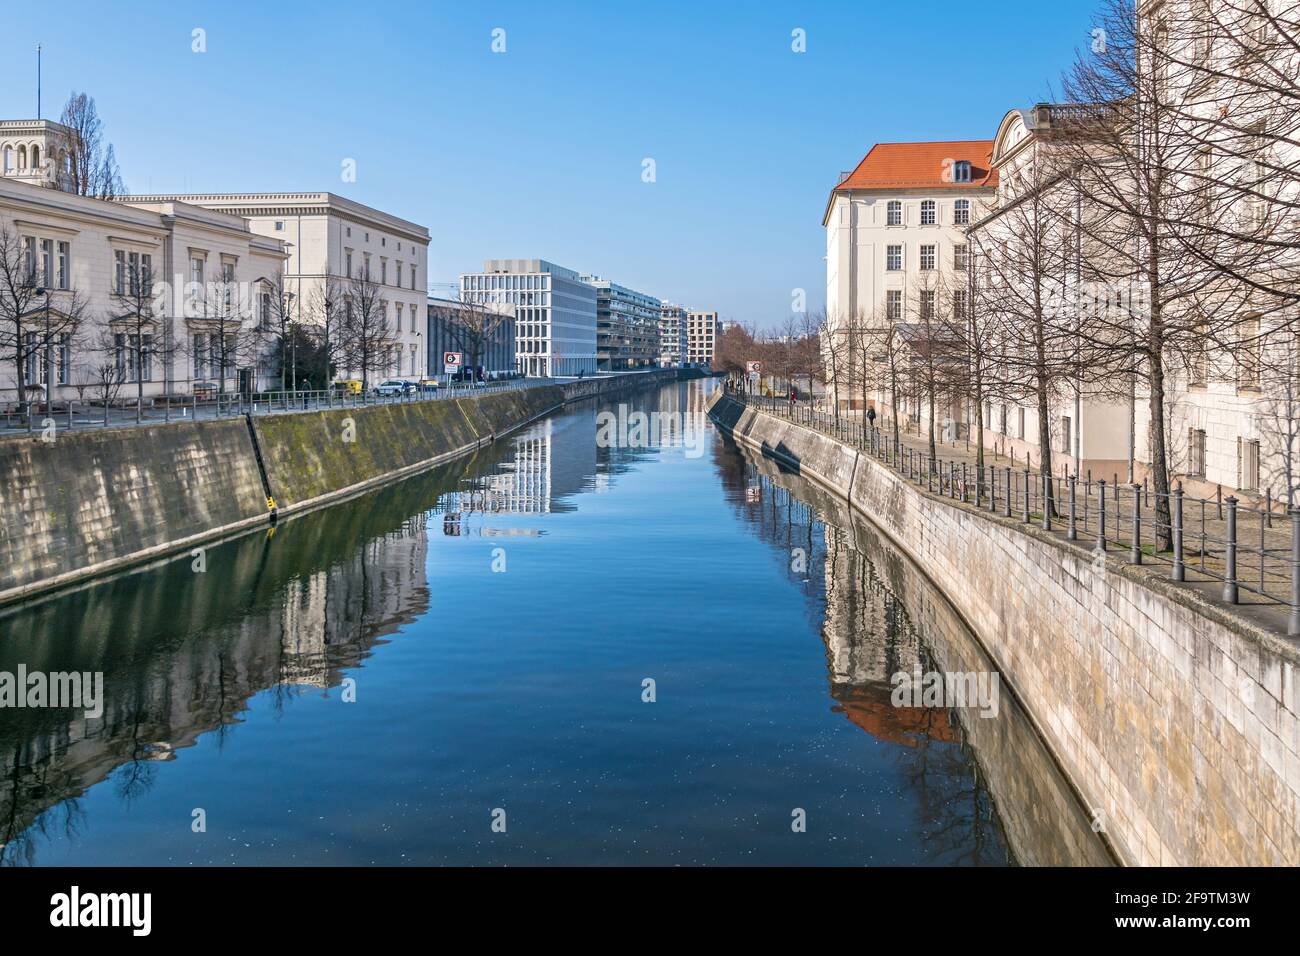 Berlin, Germany - March 1, 2021: Berlin-Spandau shipping canal with the late classicist style building of Hamburger Bahnhof and Federal Ministry for E Stock Photo